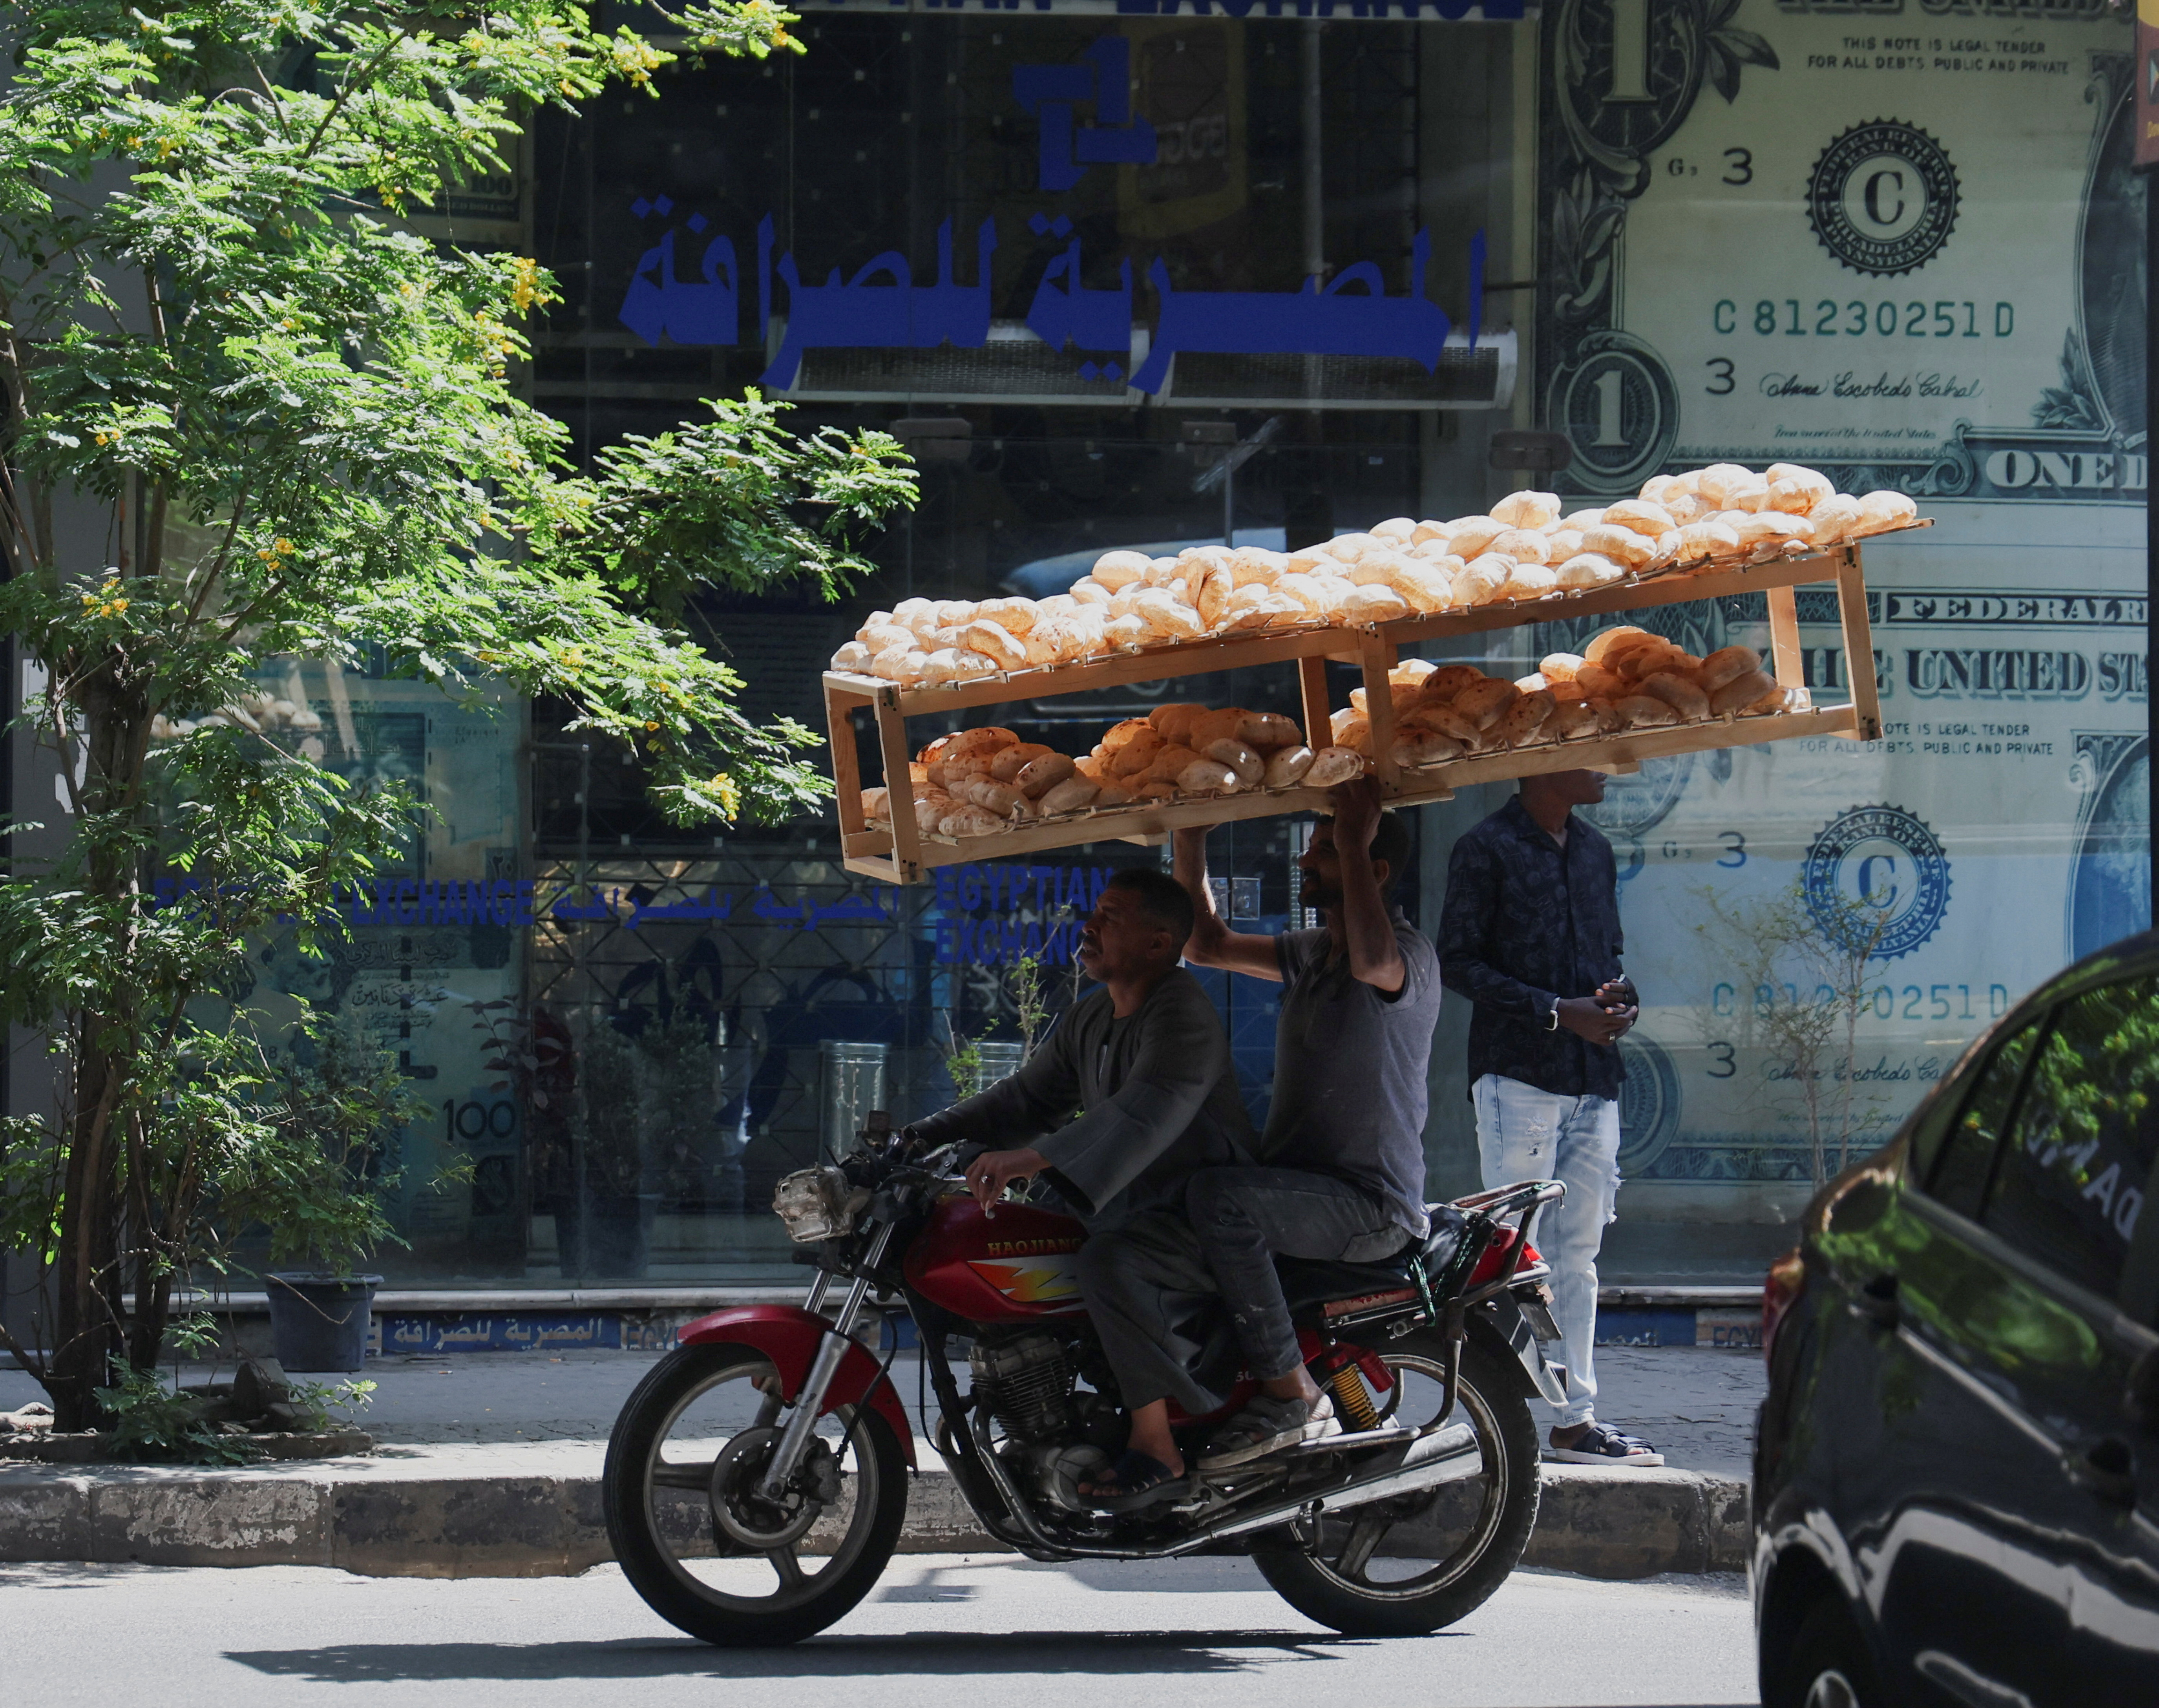 Egyptian street vendors carrying breads, drive past a currency exchange point, displaying images of the U.S. dollar, in Cairo